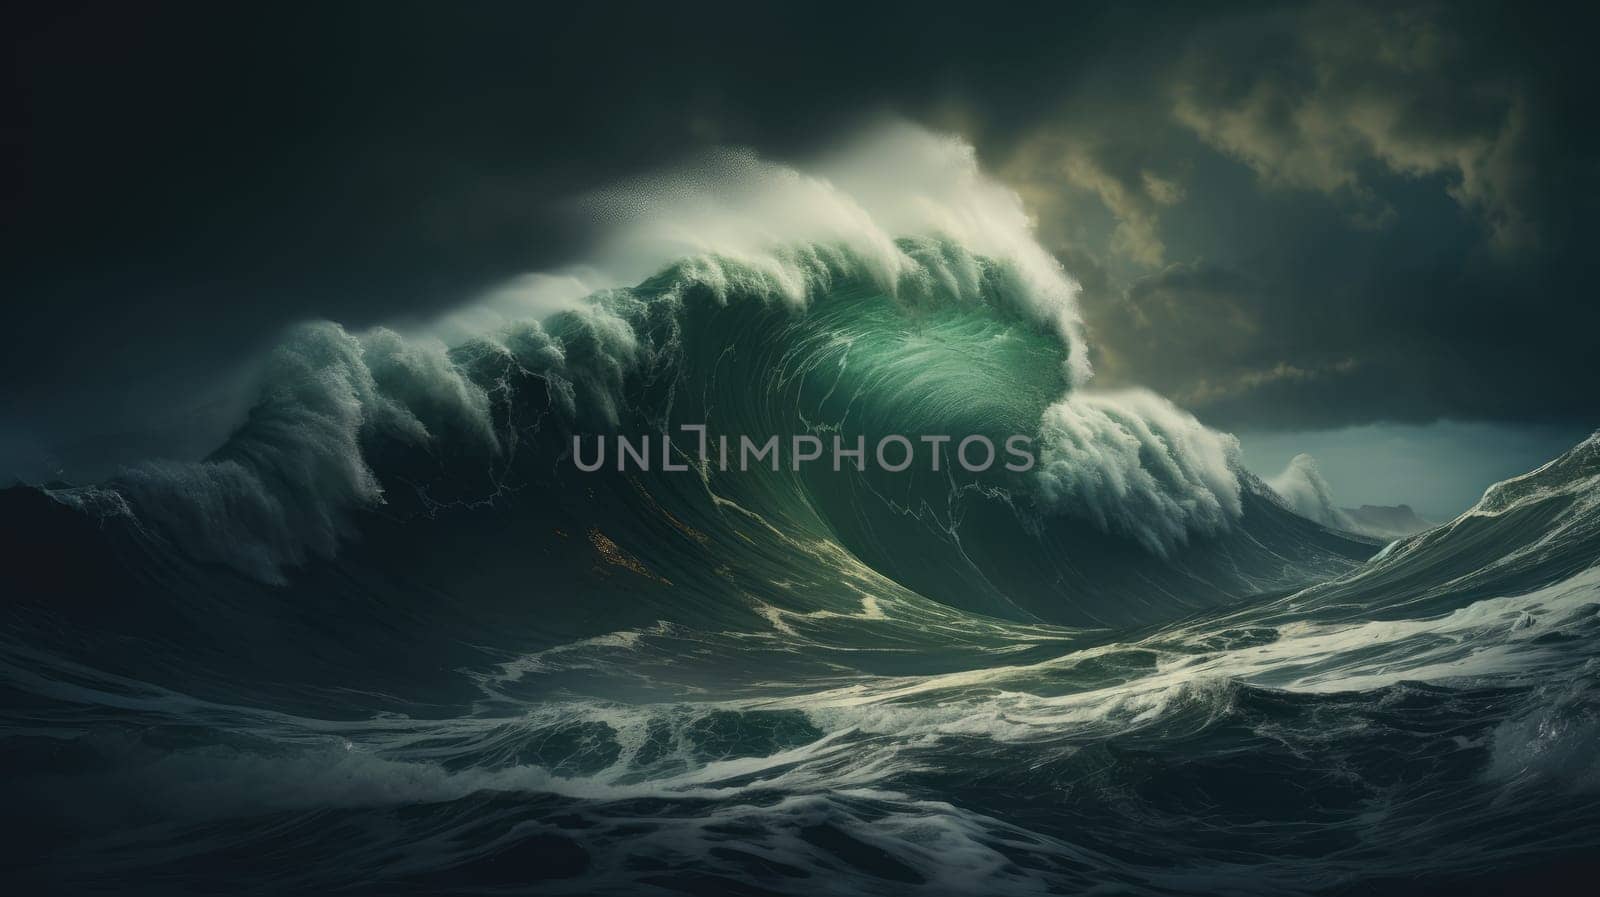 Ocean wave during storm. Huge wave breaking with a lot of spray and splash. Sea water background